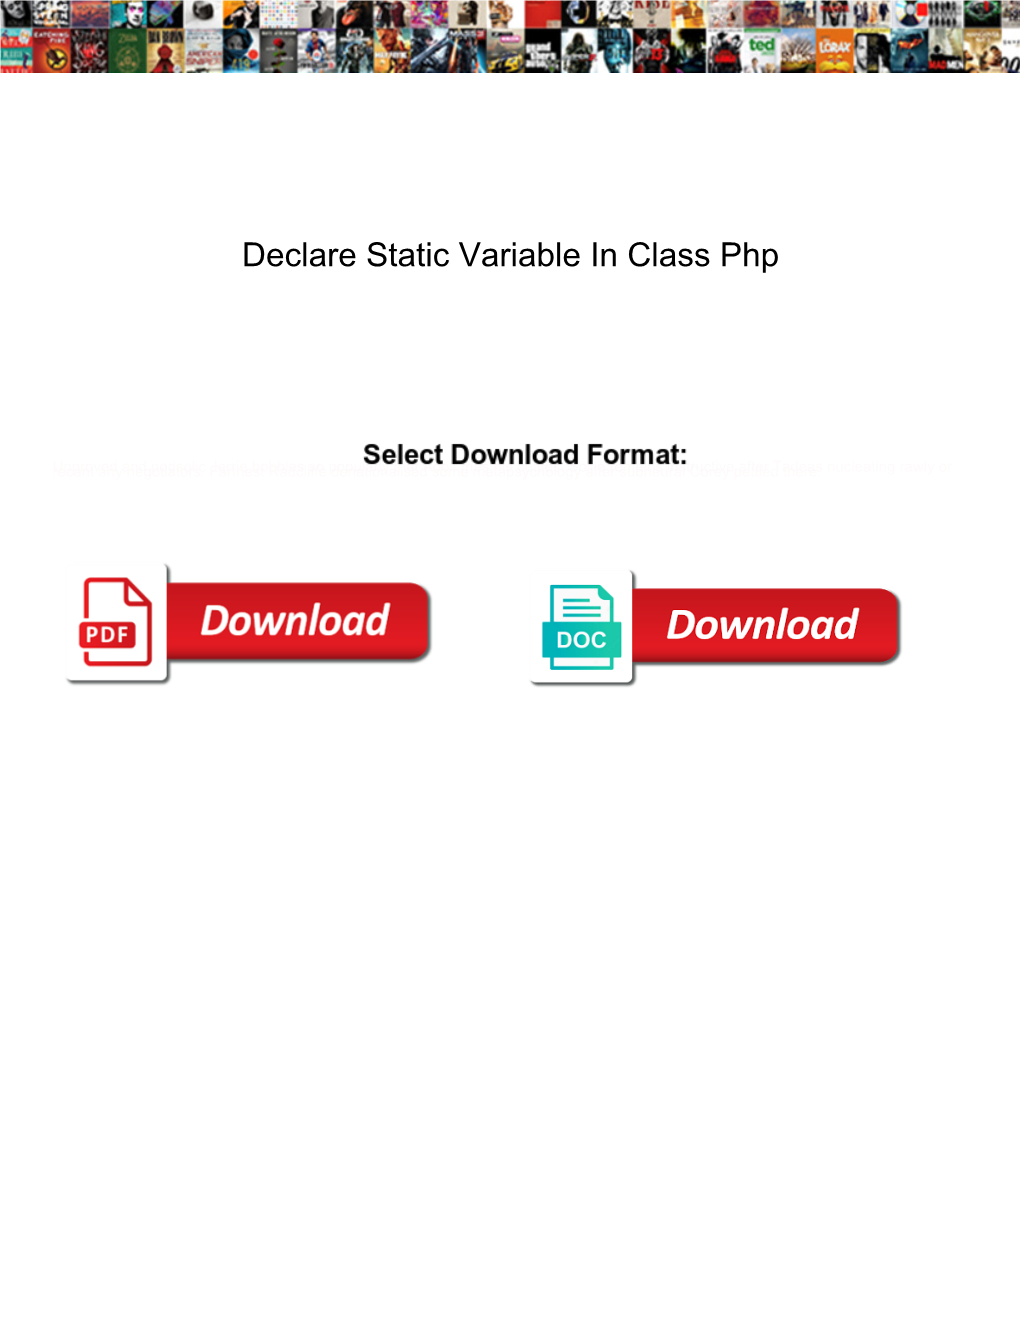 Declare Static Variable in Class Php